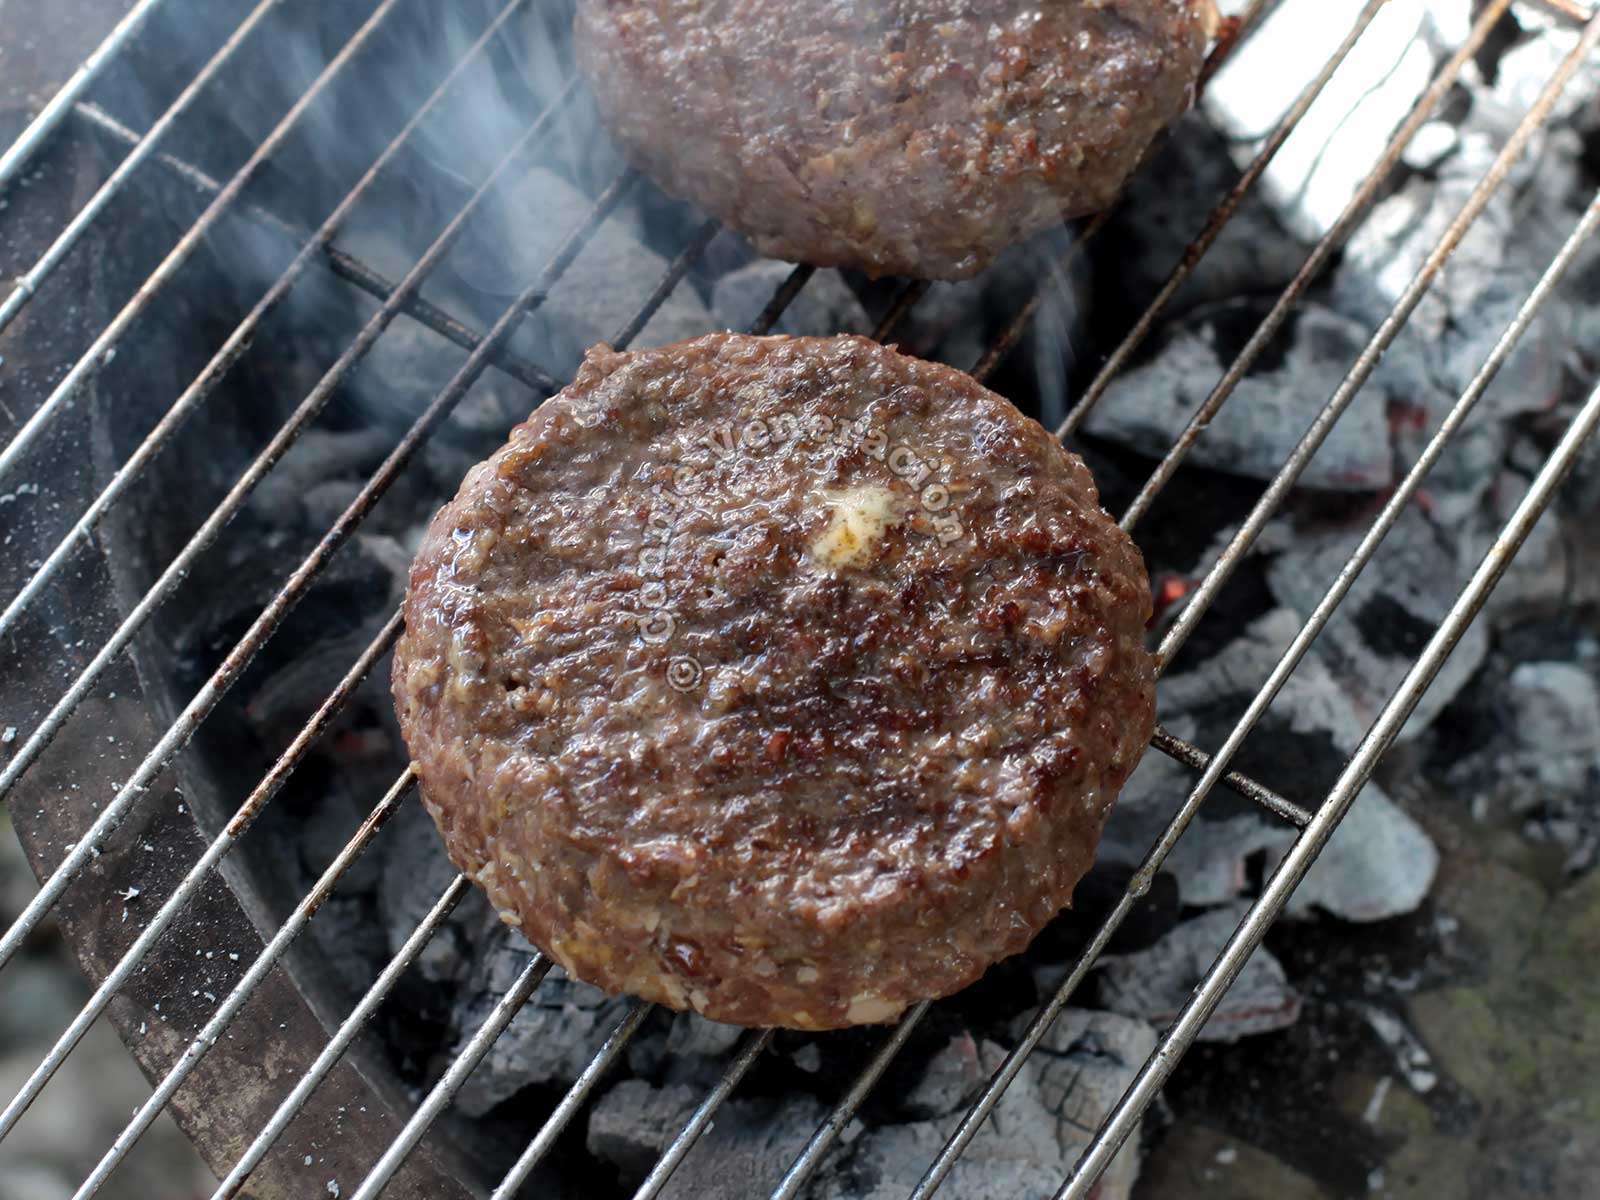 Grilling burgers over charcoal